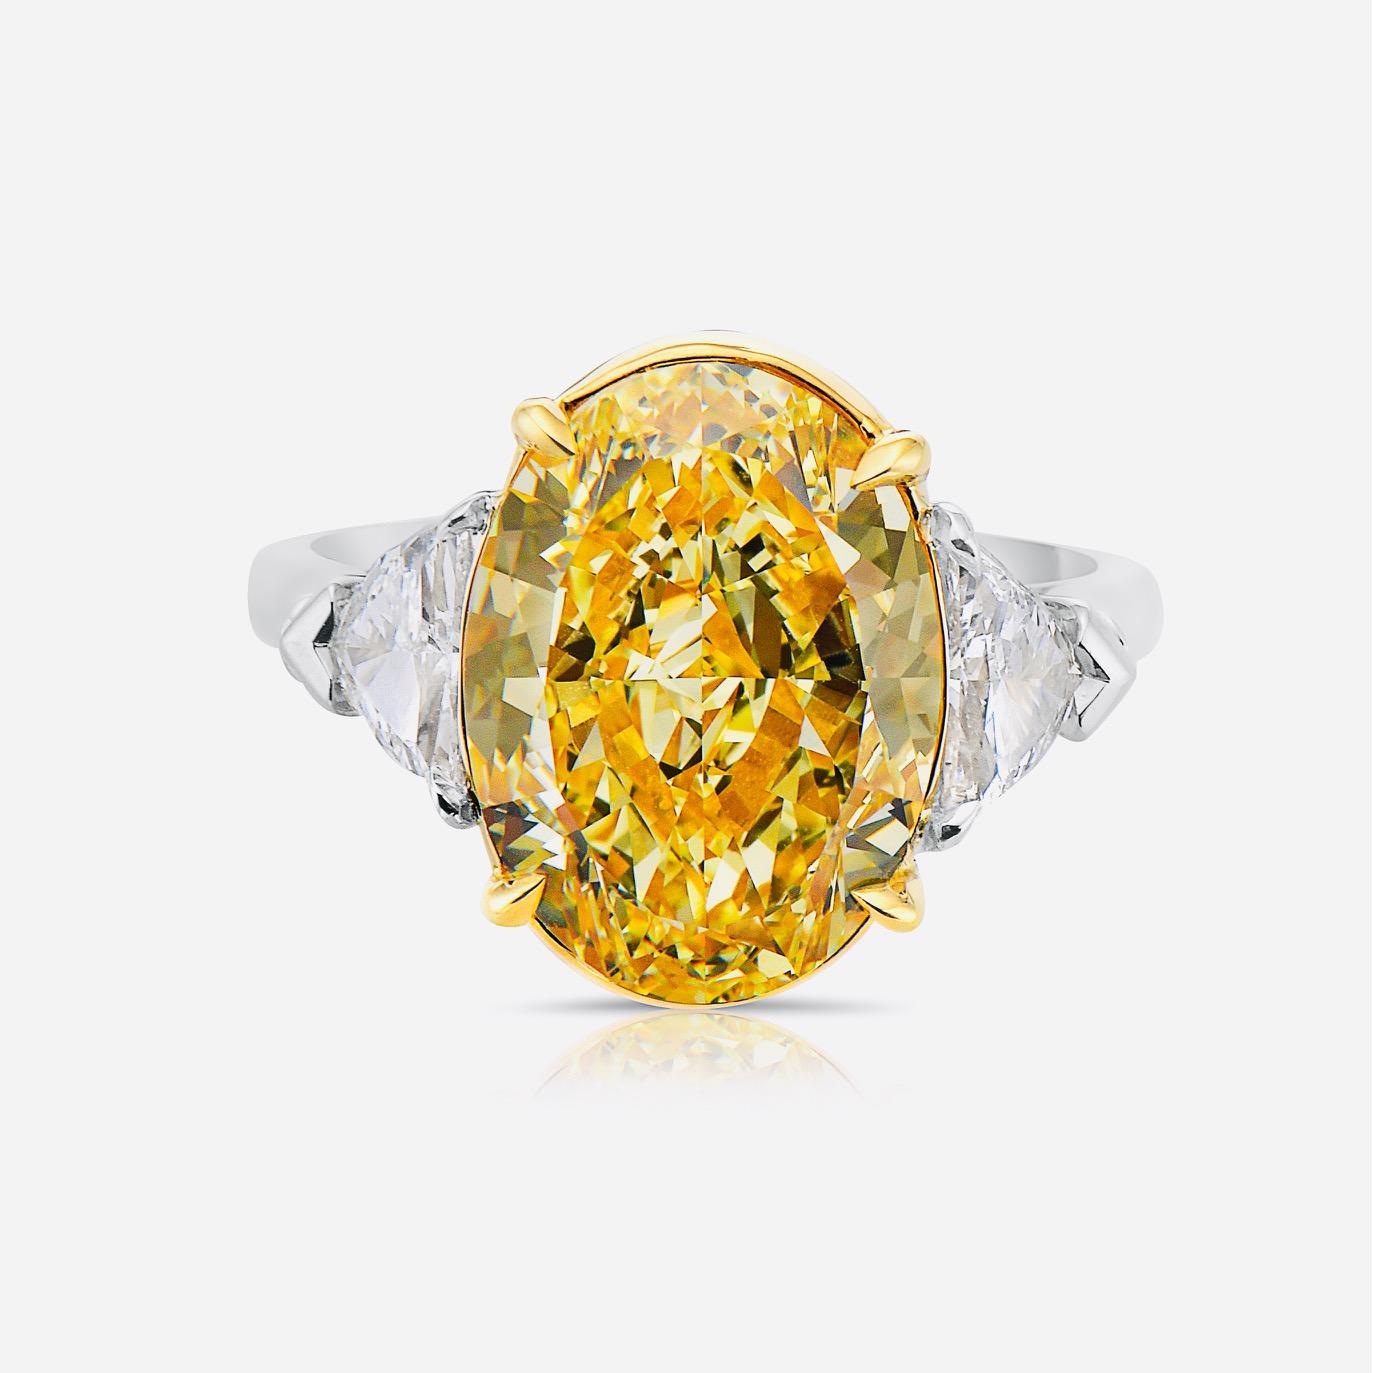 From The Vault at Emilio Jewelry Located on New York's iconic Fifth Avenue,
Showcasing a very special and rare Gia certified natural fancy intense yellow oval diamond set in the center. Spectacular Ring! Total weight listed in title. 
We specialize